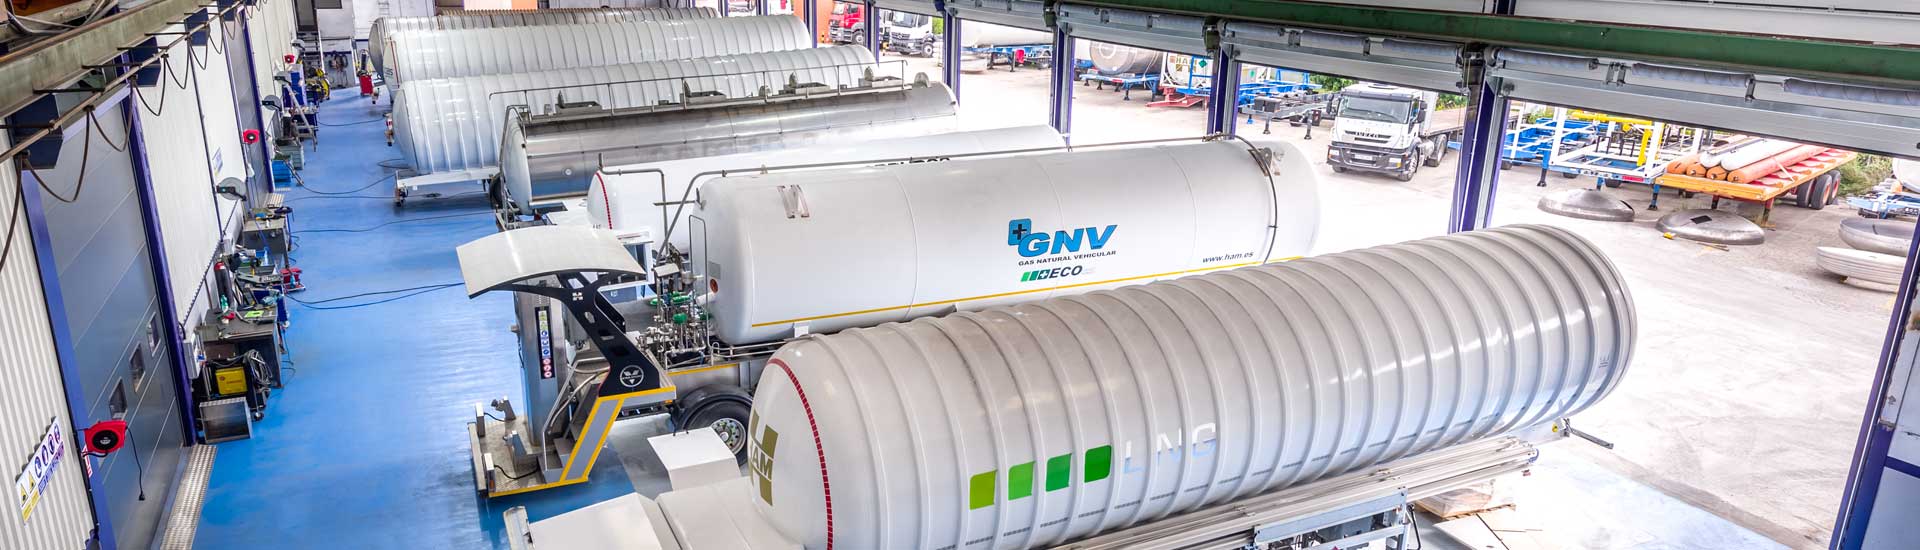 At Vakuum we design and manufacture LNG semi-trailers adapted to the real needs of our customers